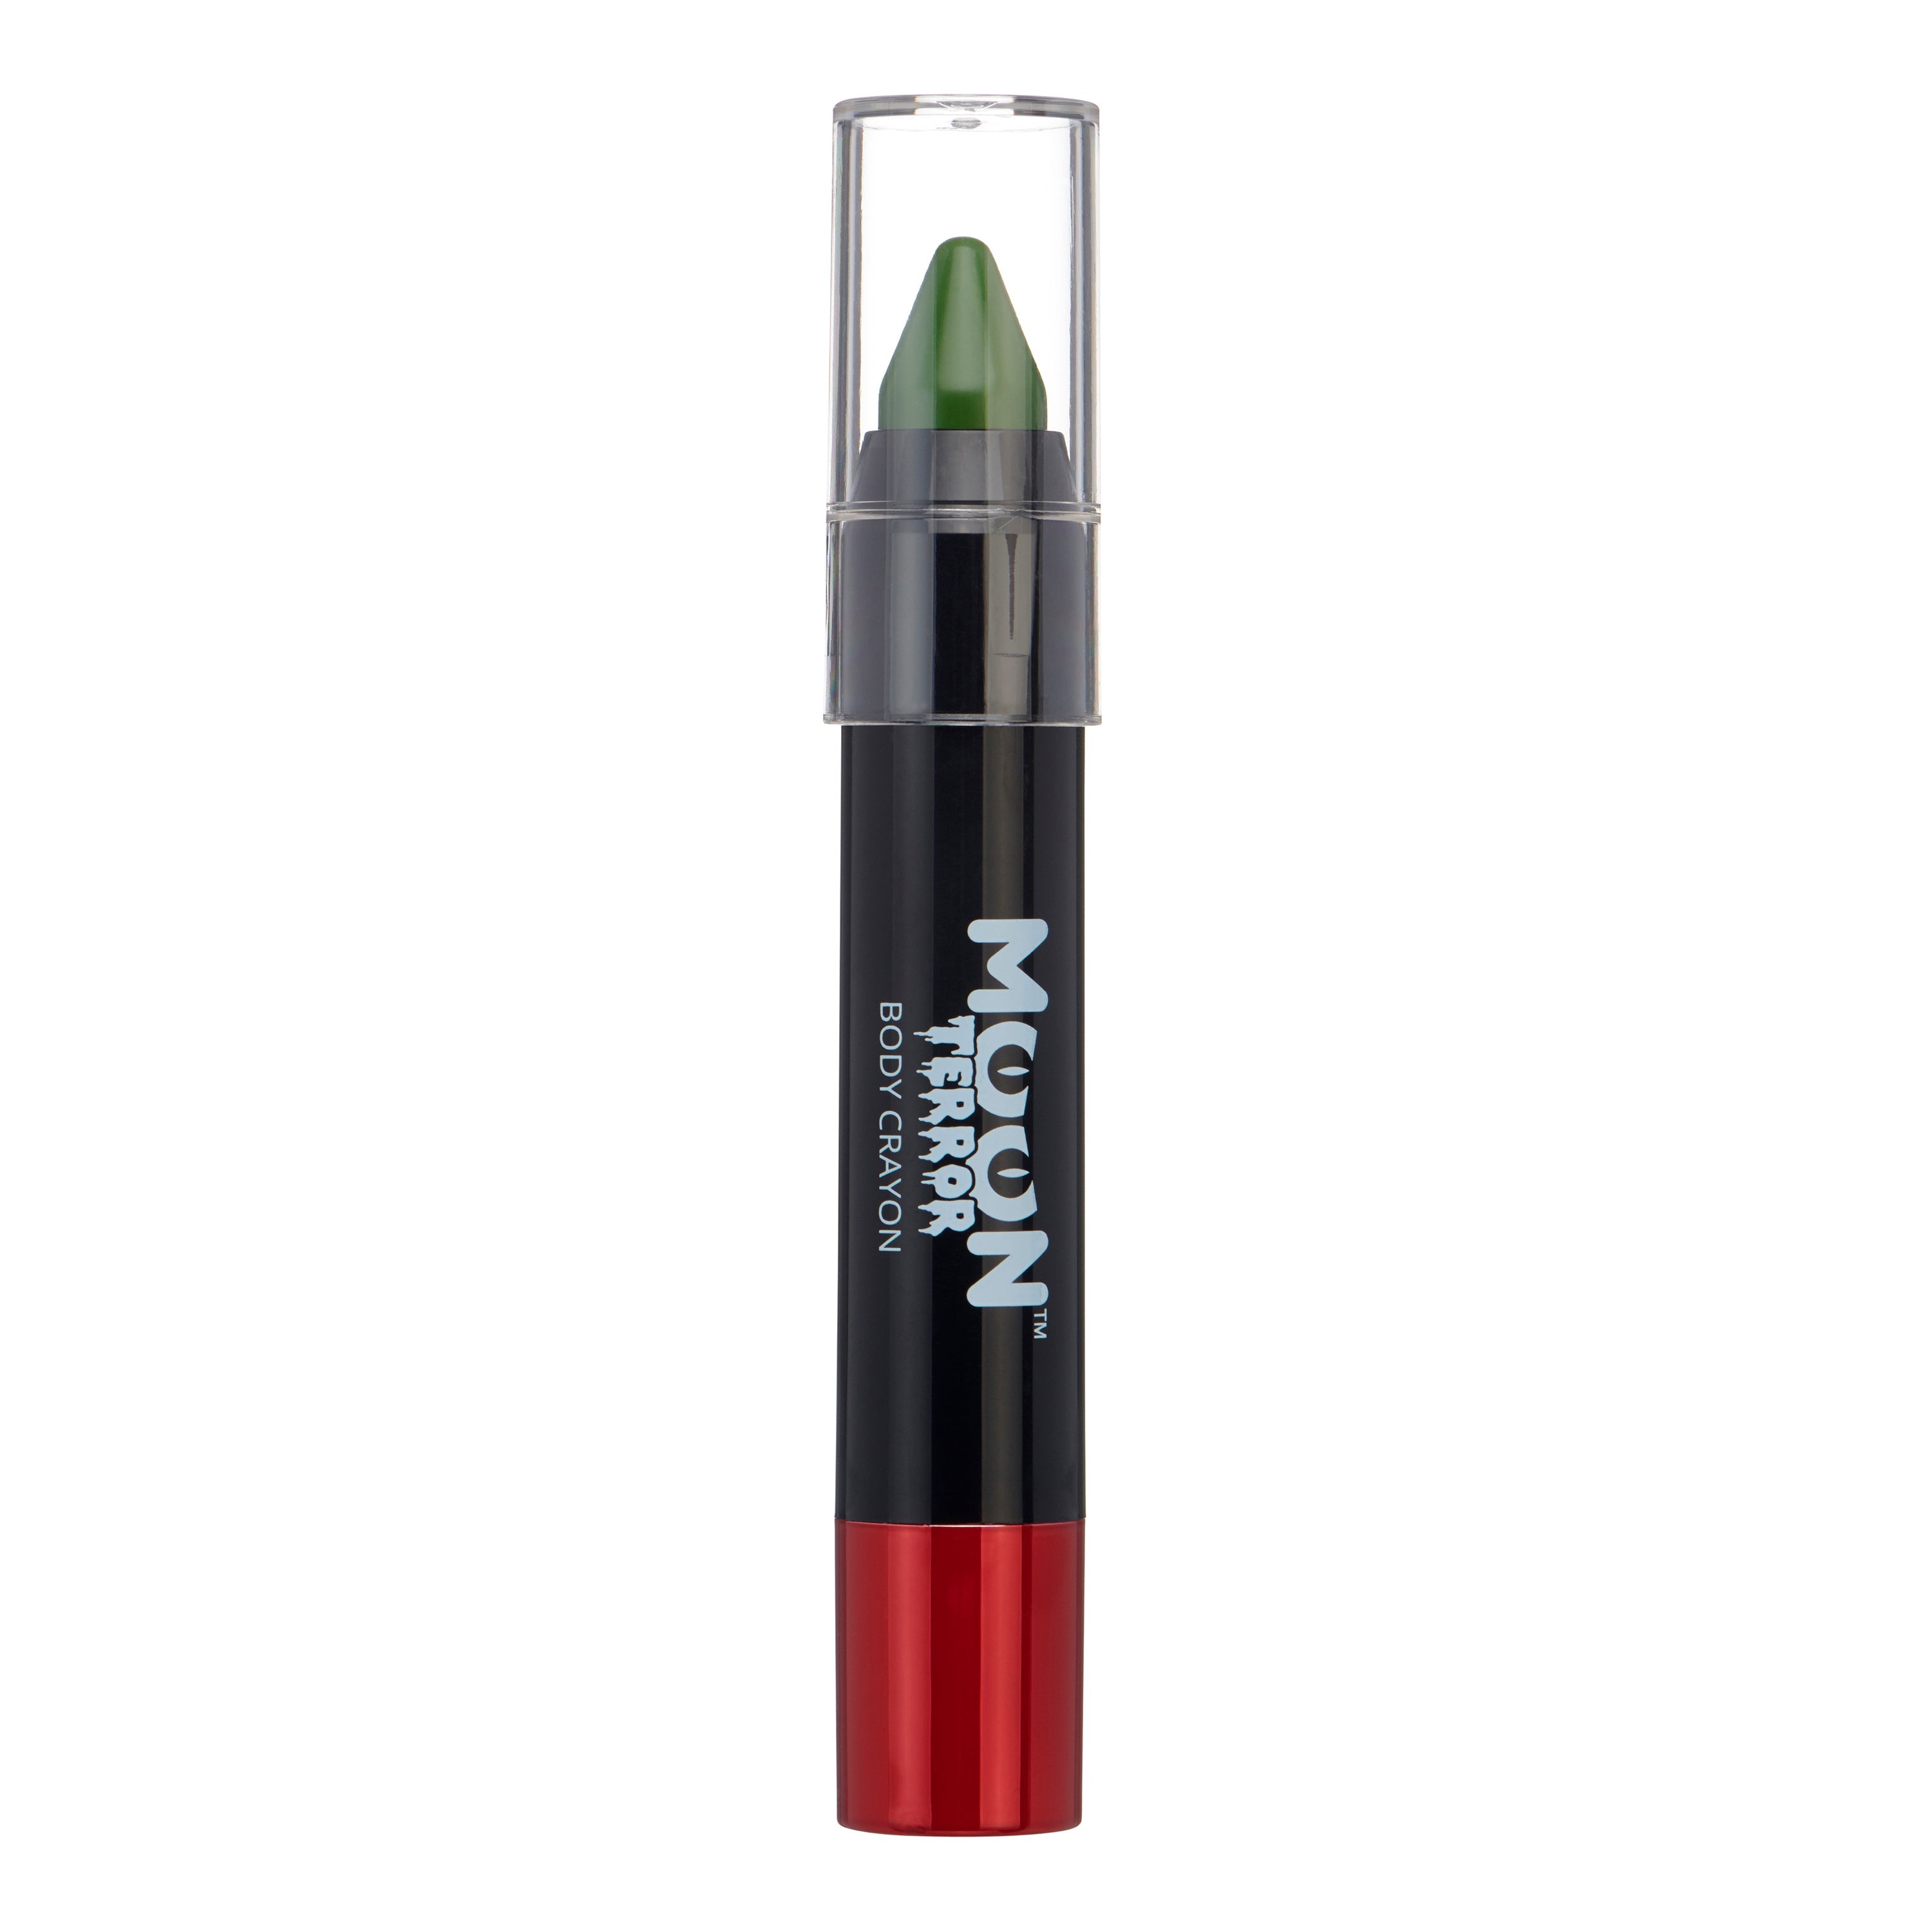 Zombie Green - Terror Face & Body Crayon, 3.5g. Cosmetically certified, FDA & Health Canada compliant and cruelty free.